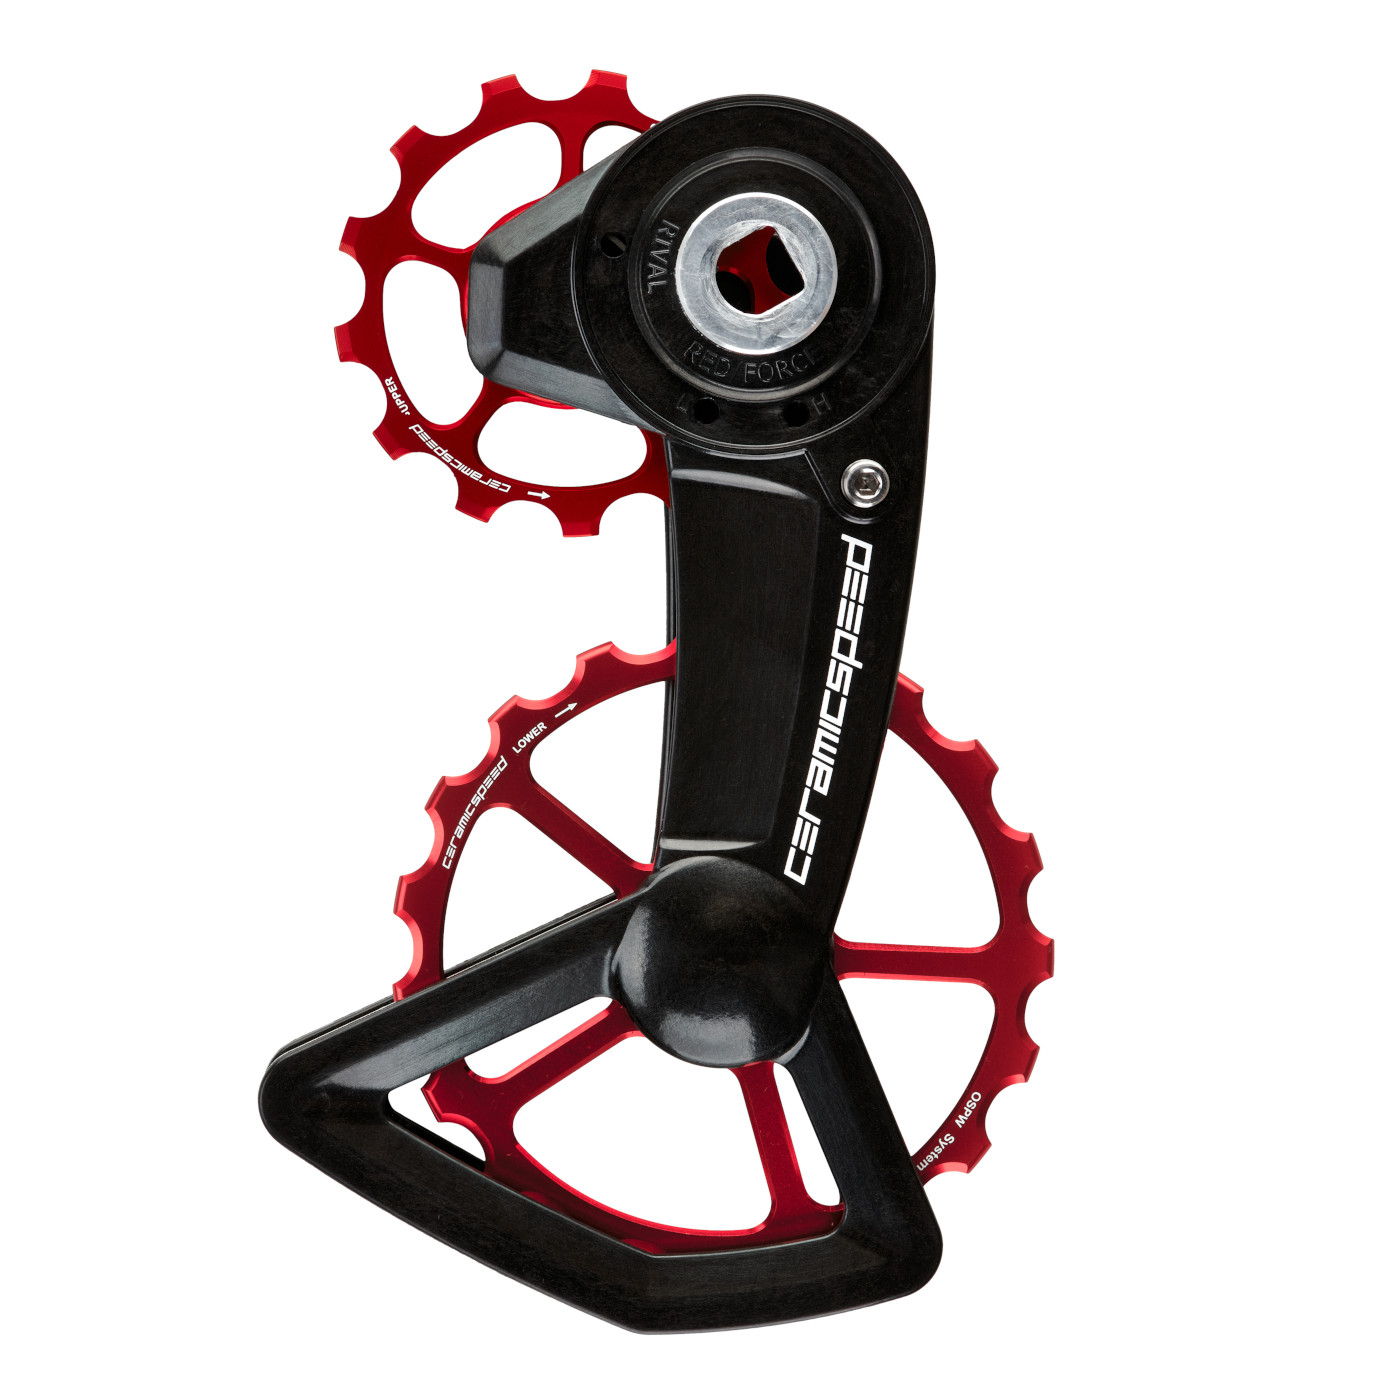 Picture of CeramicSpeed OSPW X Derailleur Pulley System - for SRAM Red/Force/Rival AXS XPLR | 15/19 Teeth | Coated Bearings - red